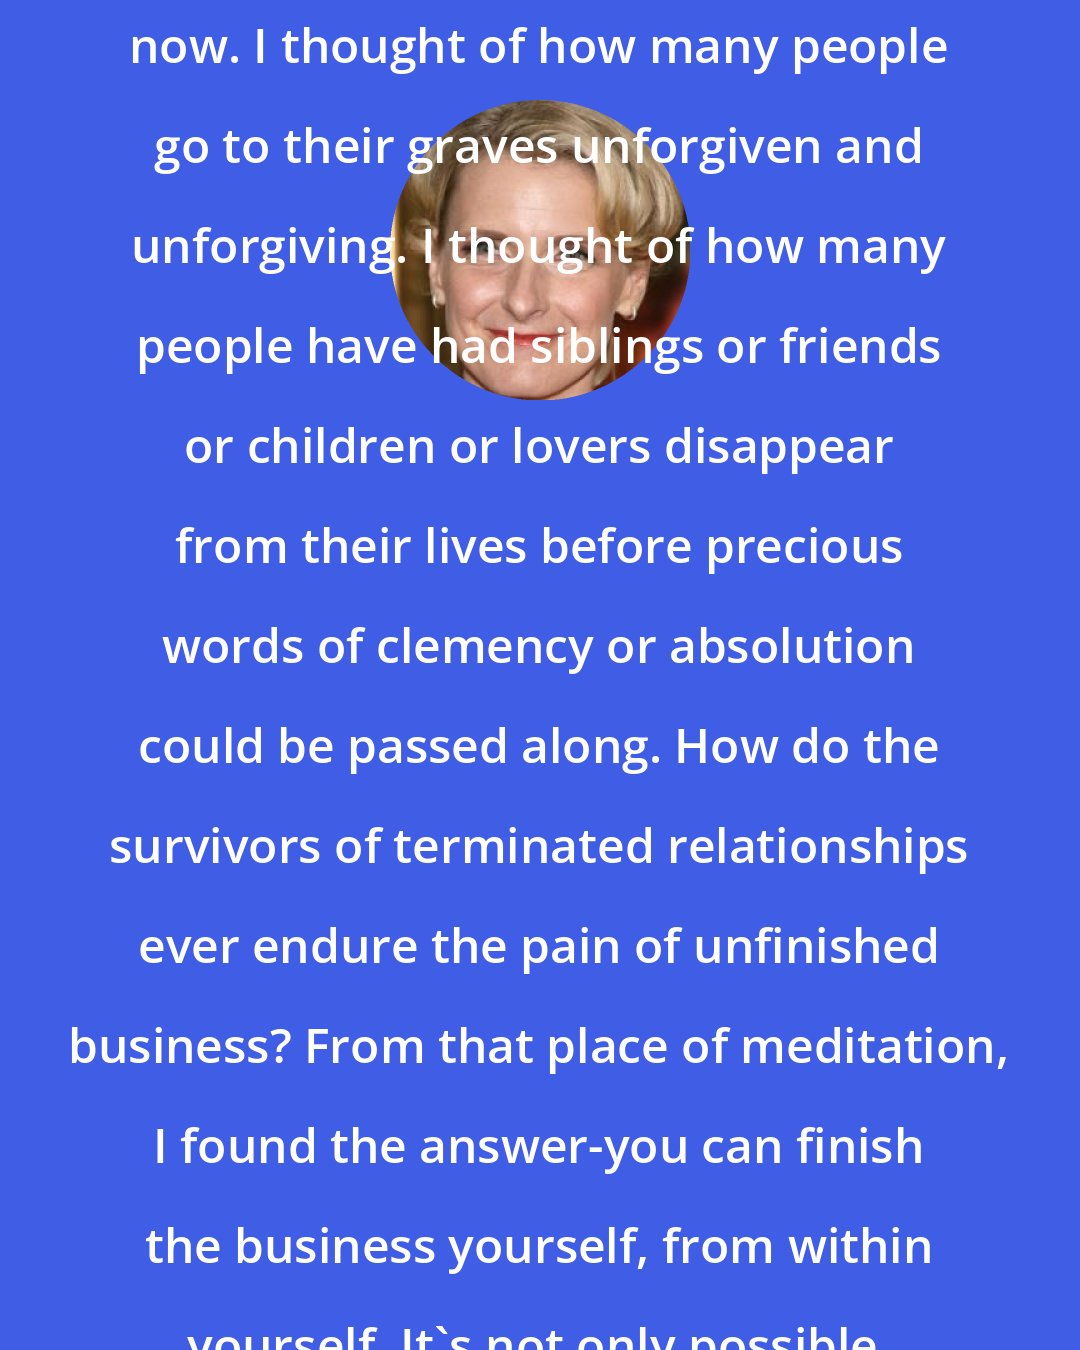 Elizabeth Gilbert: Offer it up personally,then. Right now. I thought of how many people go to their graves unforgiven and unforgiving. I thought of how many people have had siblings or friends or children or lovers disappear from their lives before precious words of clemency or absolution could be passed along. How do the survivors of terminated relationships ever endure the pain of unfinished business? From that place of meditation, I found the answer-you can finish the business yourself, from within yourself. It's not only possible, it's essential.